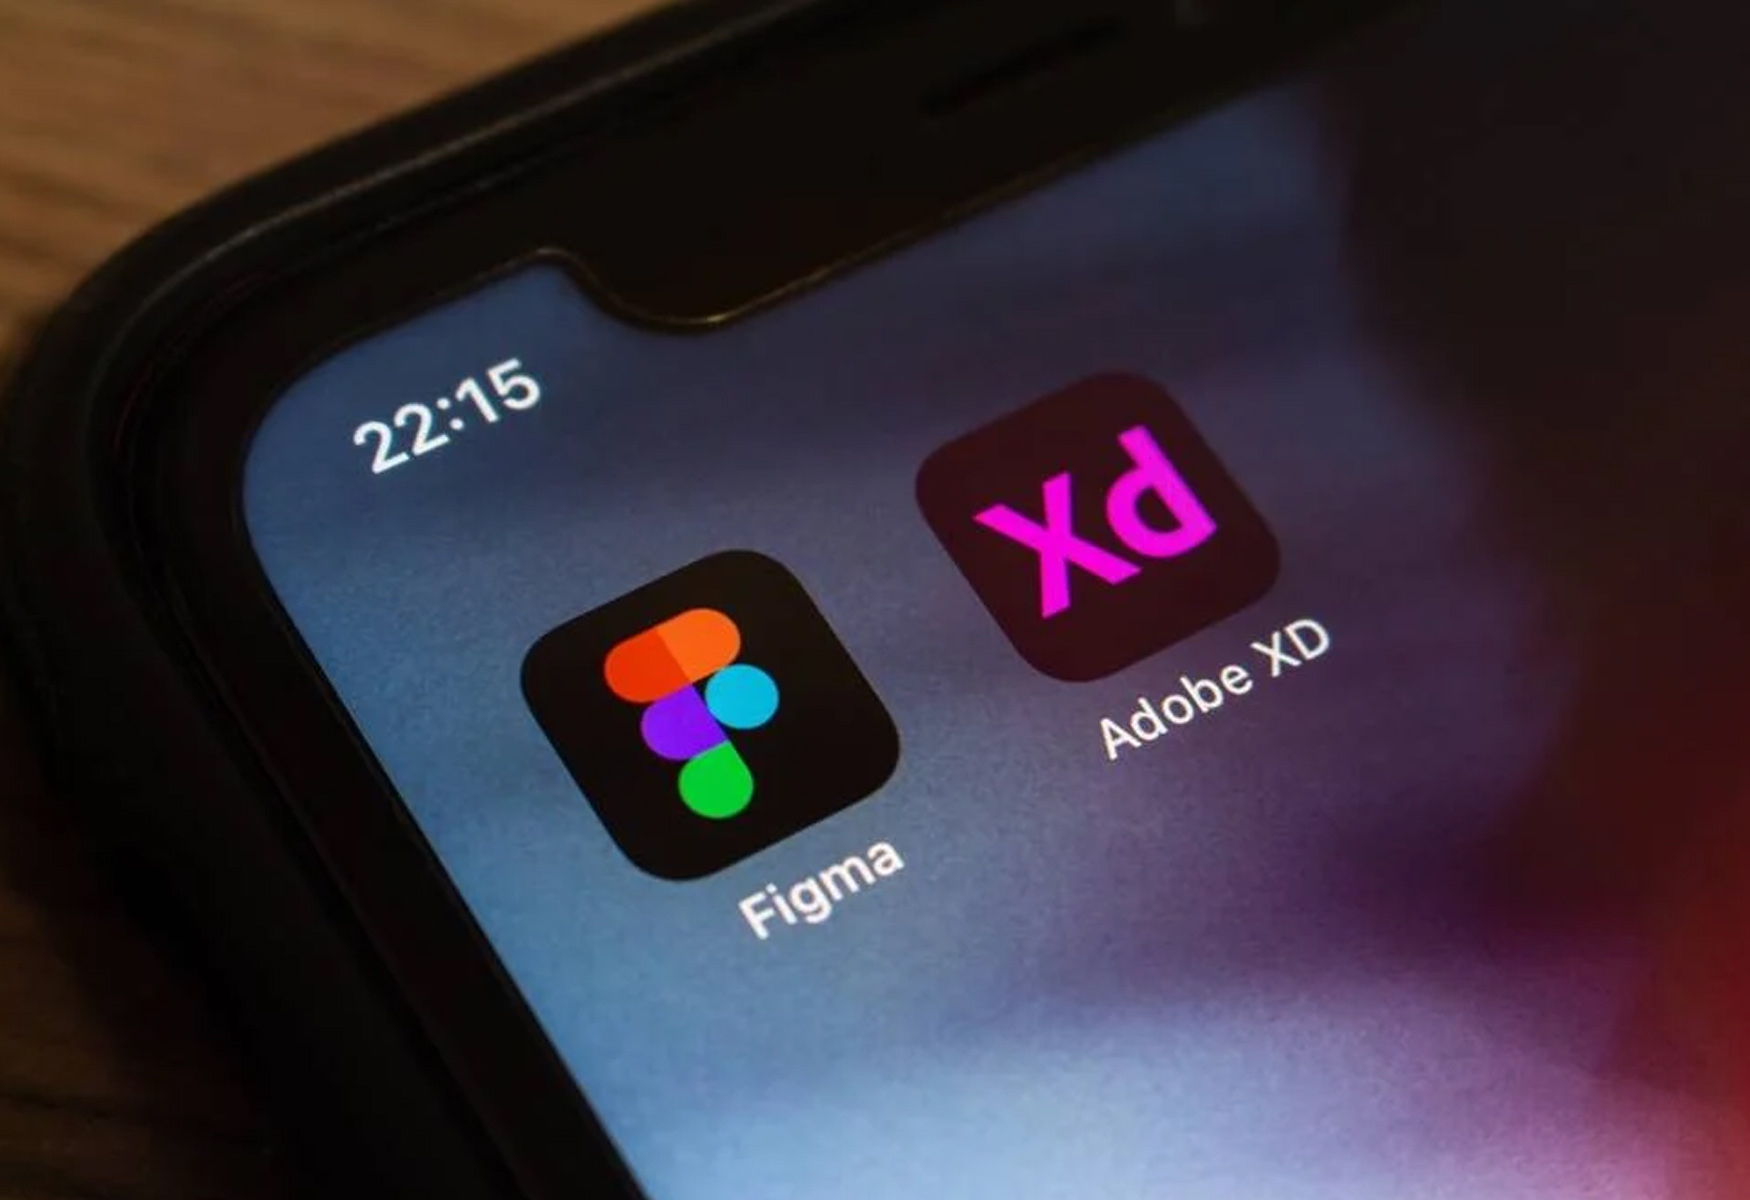 adobe-and-figma-terminate-20b-acquisition-plans-due-to-regulatory-headwinds-in-europe